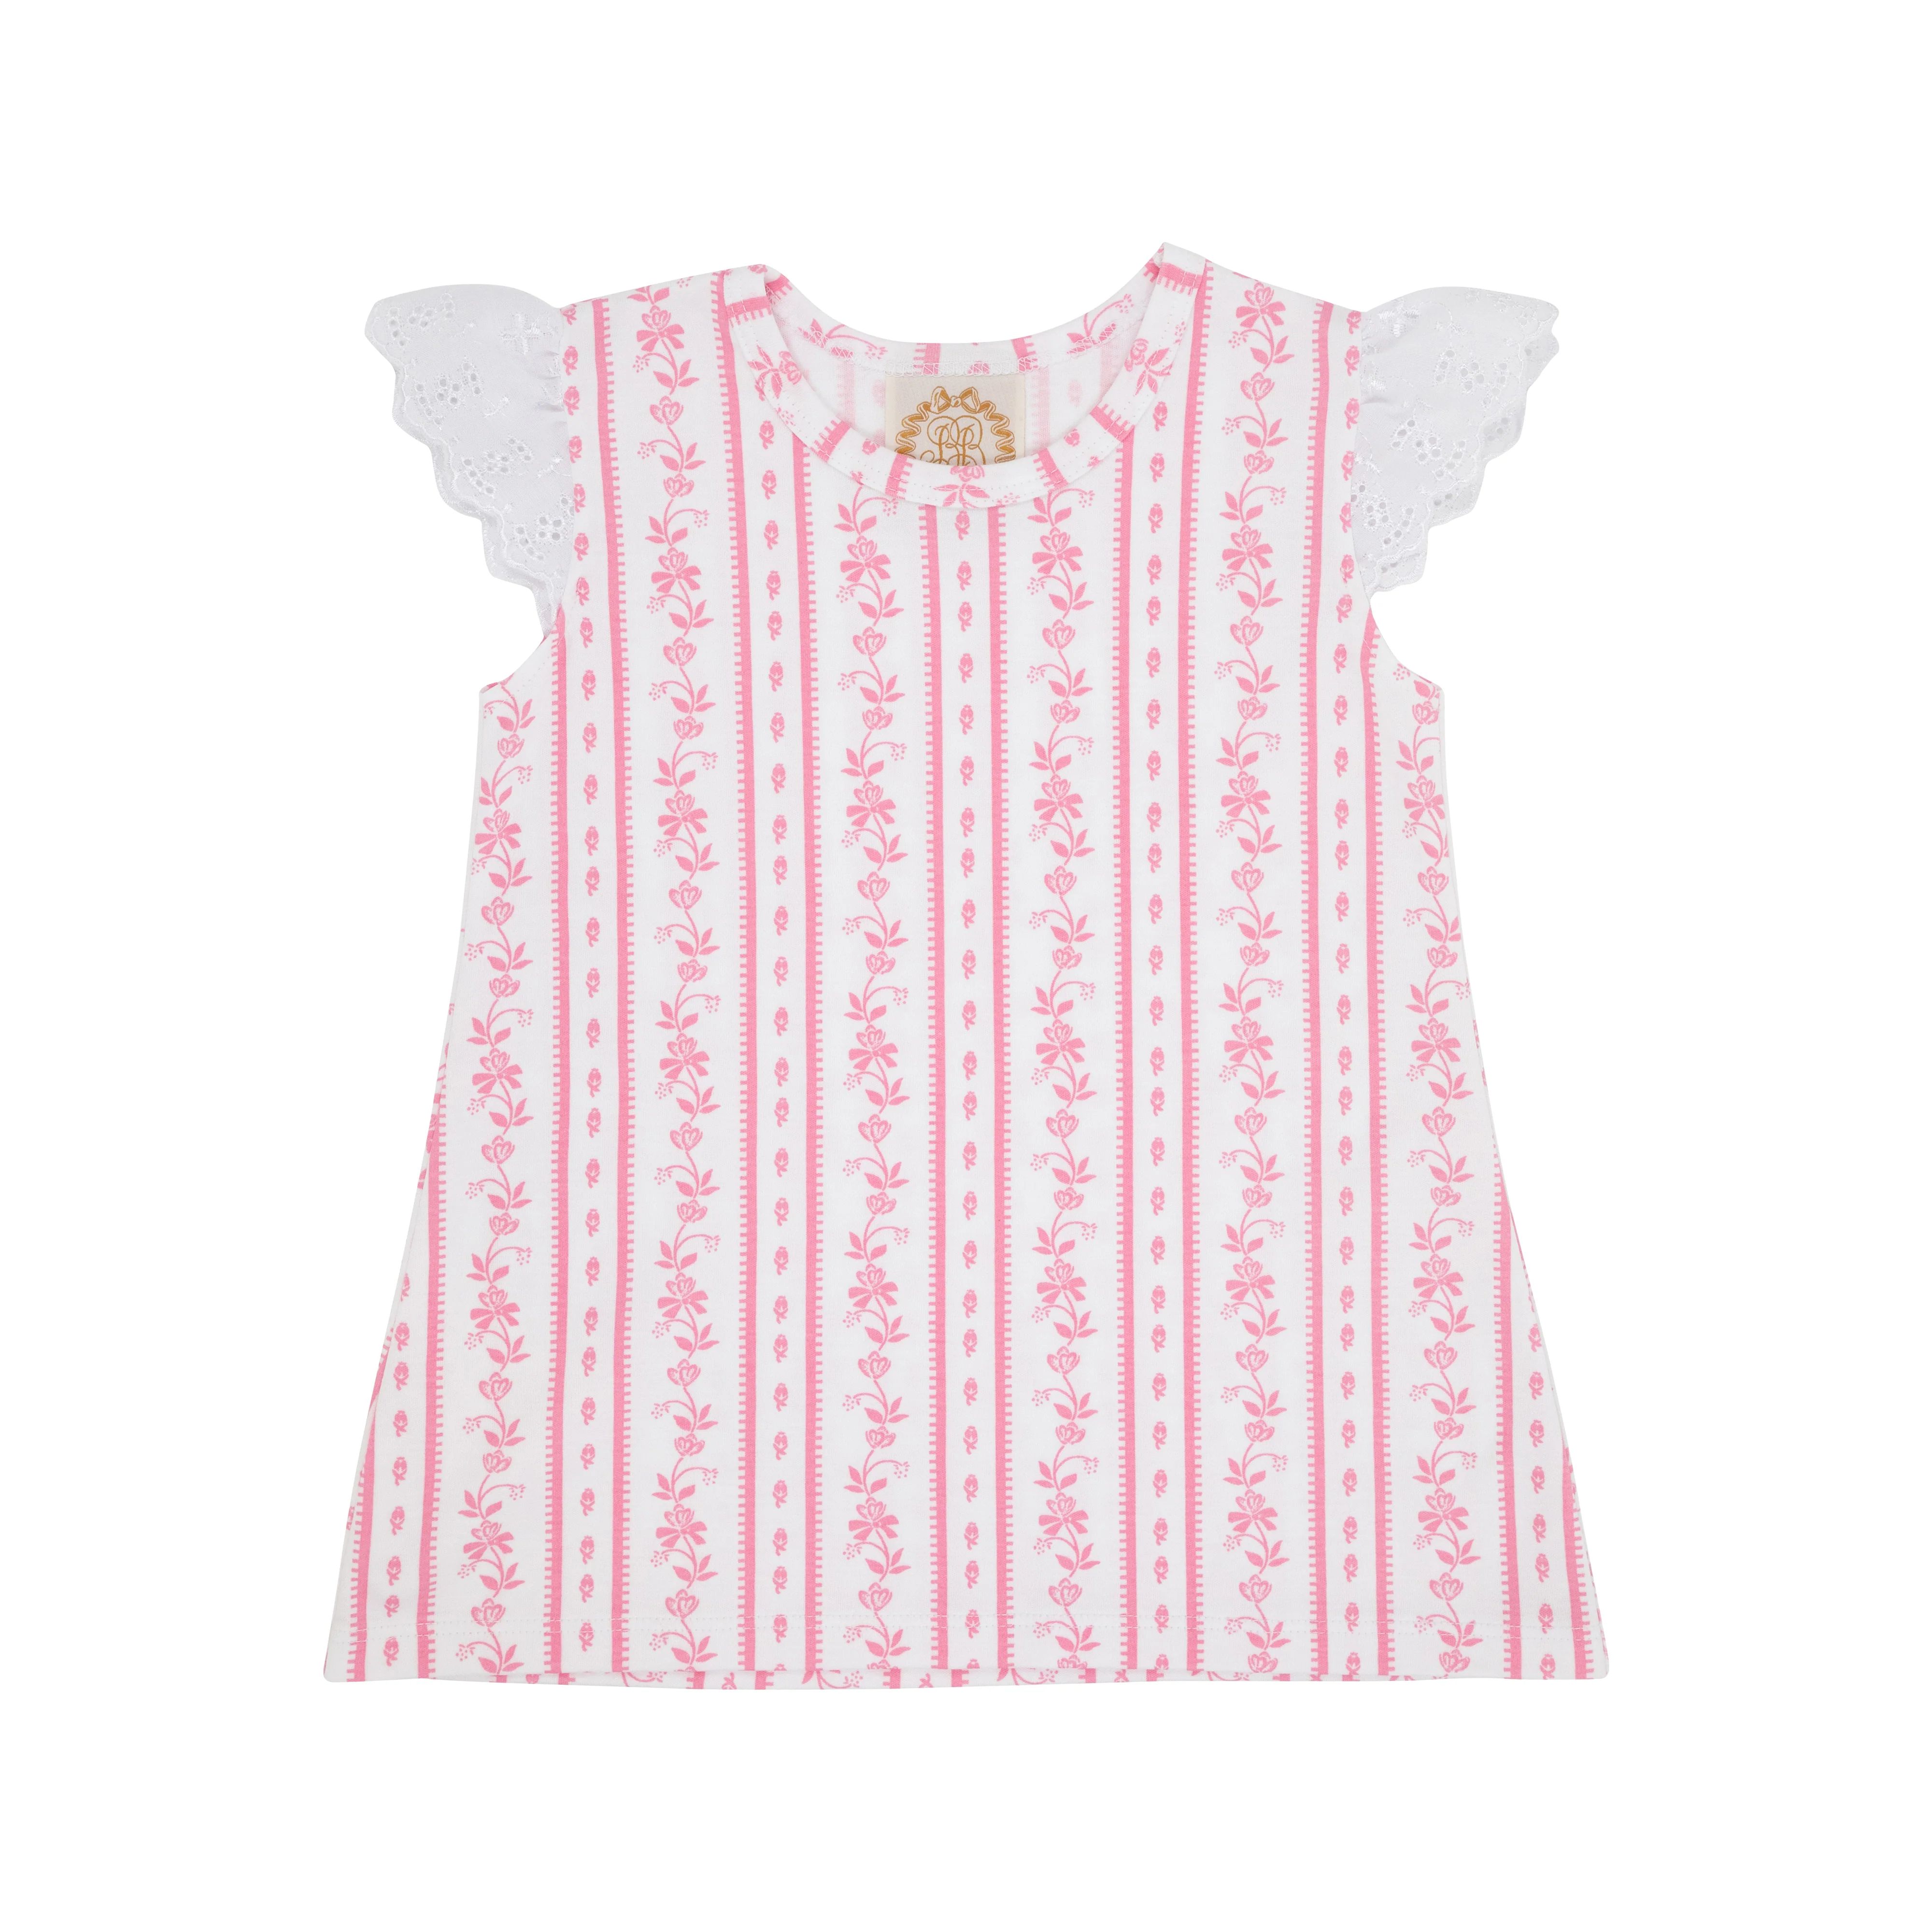 Sleeveless Polly Play Shirt - French Country Coterie with Eyelet Angel Sleeve | The Beaufort Bonnet Company